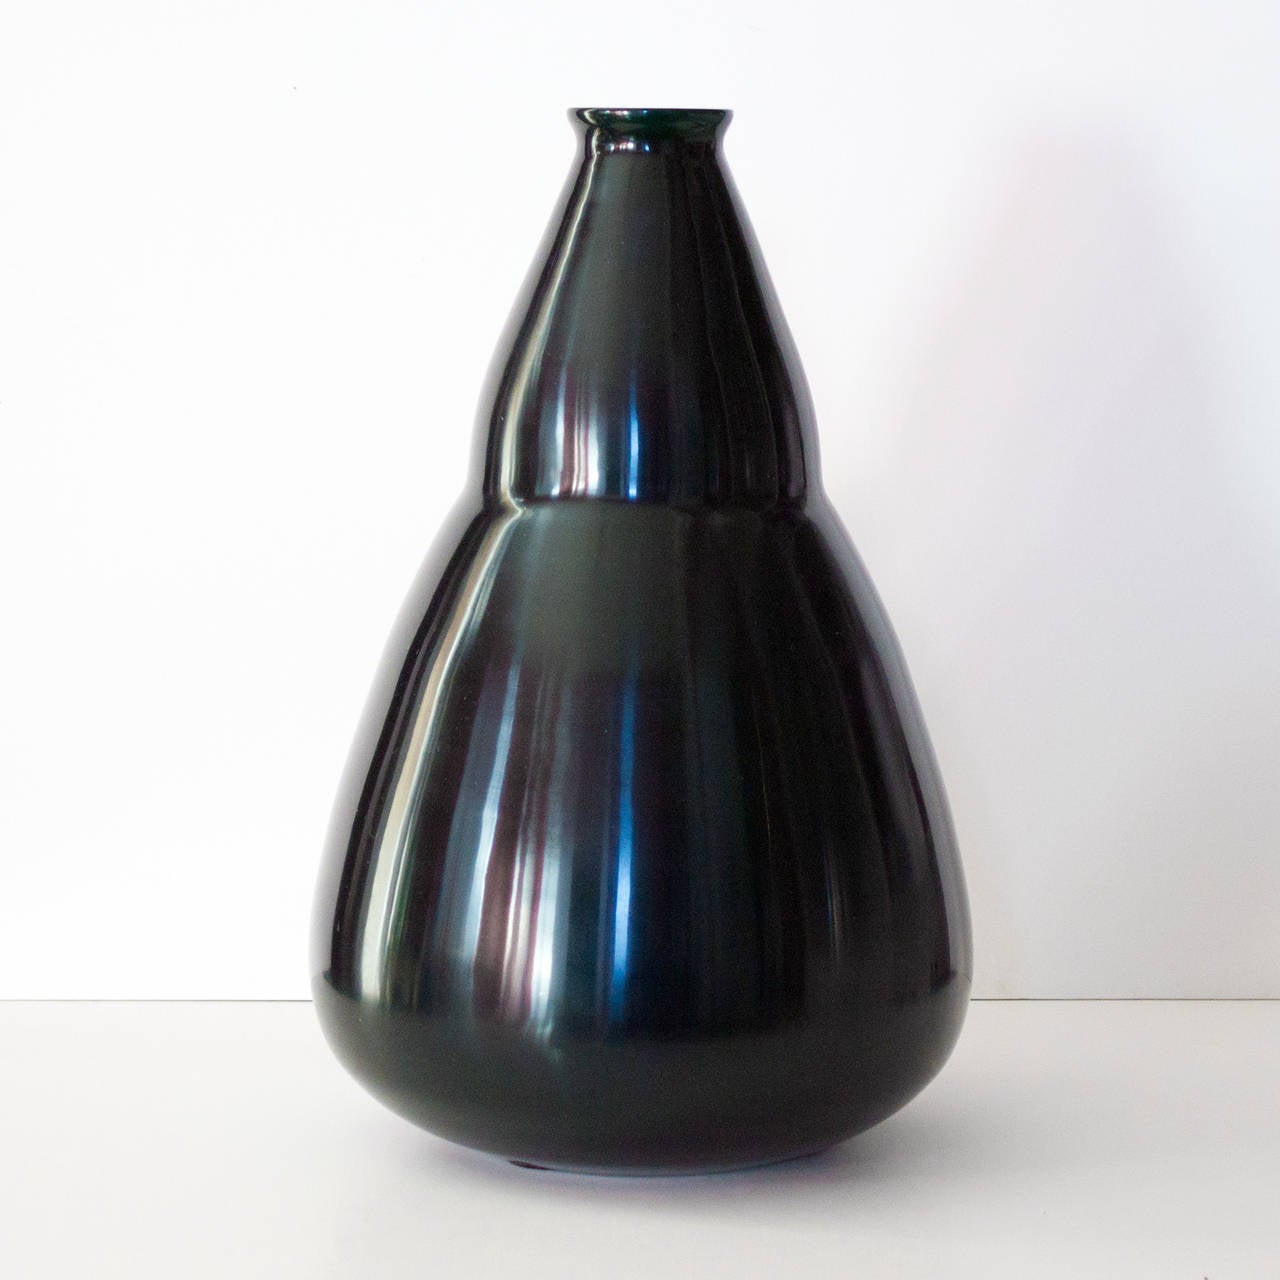 The Tourmaline Pear Shape Vase created by renowned artist Robert Kuo expressly combines earthy beauty with an organic form. Multiple layers of hand-blown glass create a luminous depth of color and a strong, graceful design. The ancient Chinese